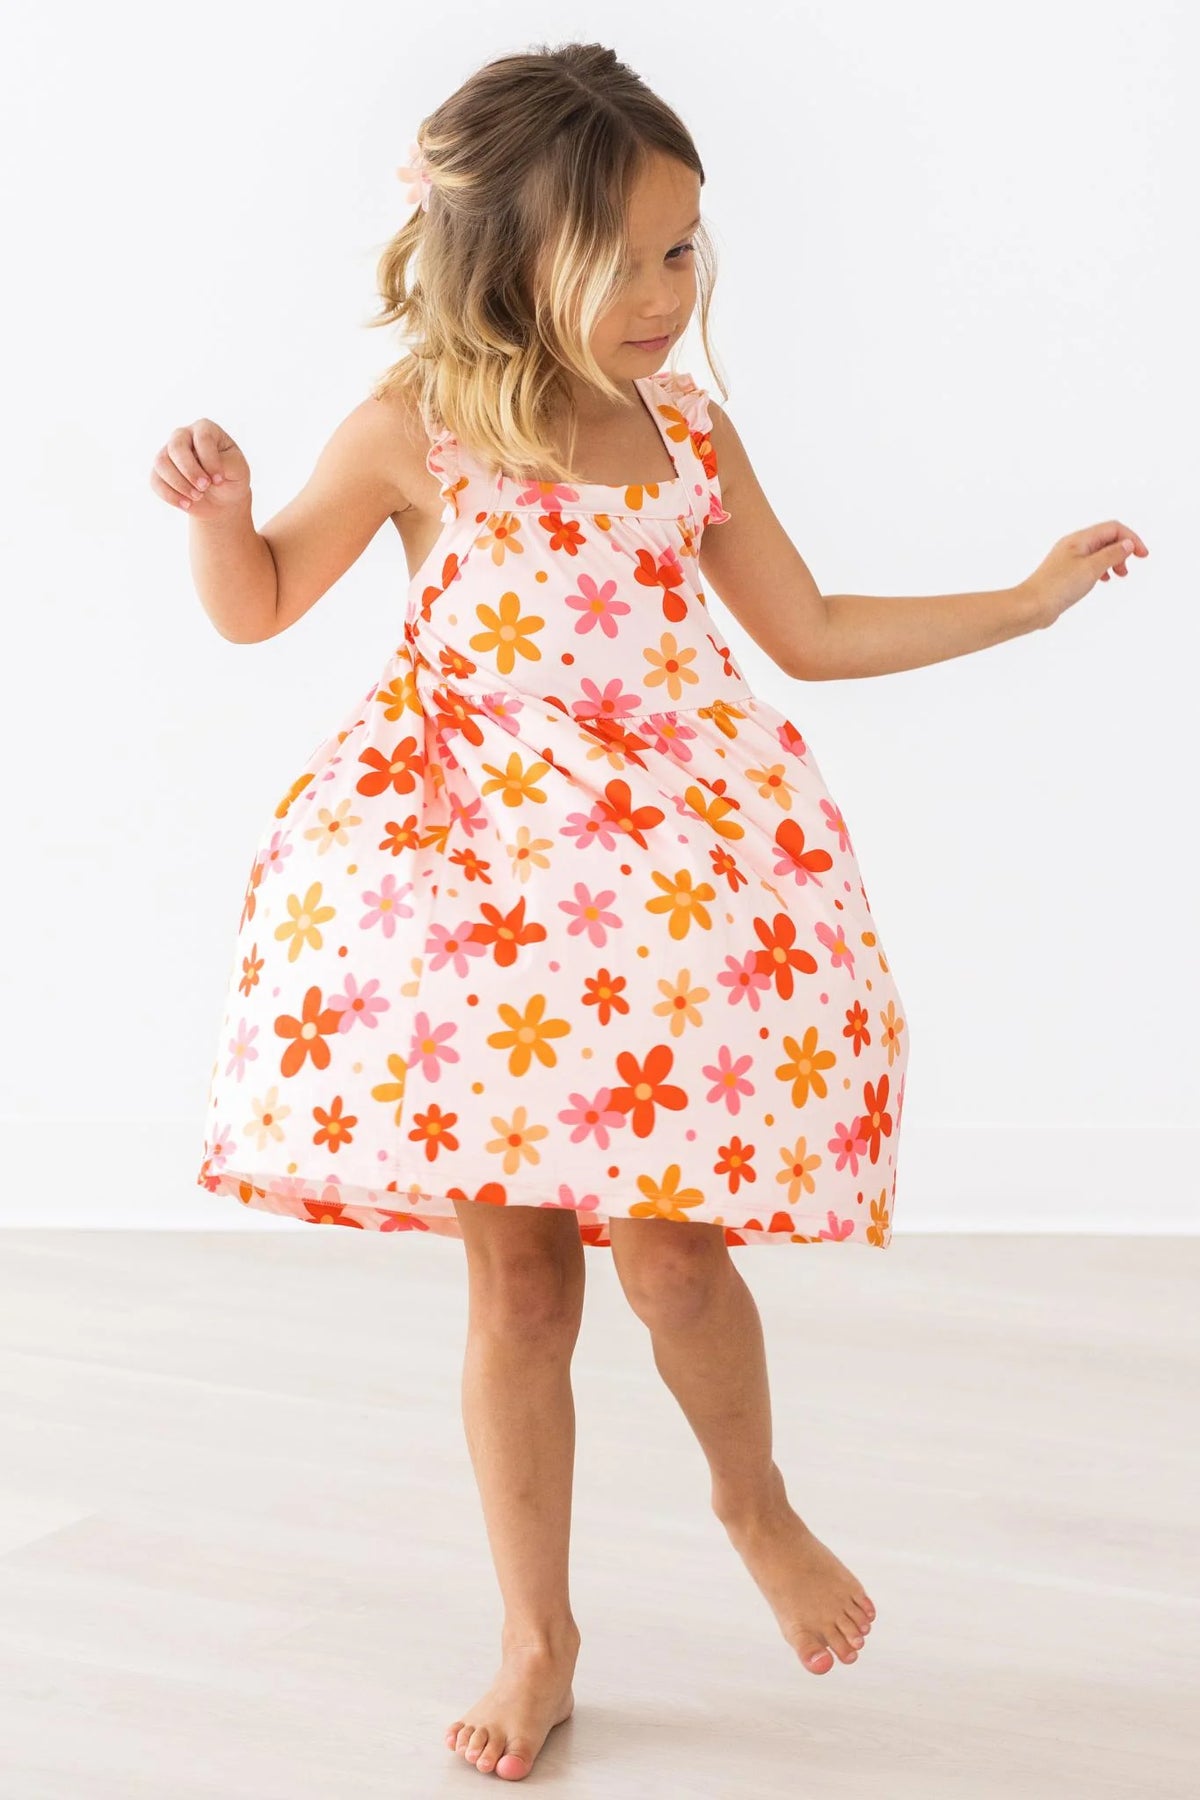 Mila & Rose - That's So Retro Dress - KC Outfitter